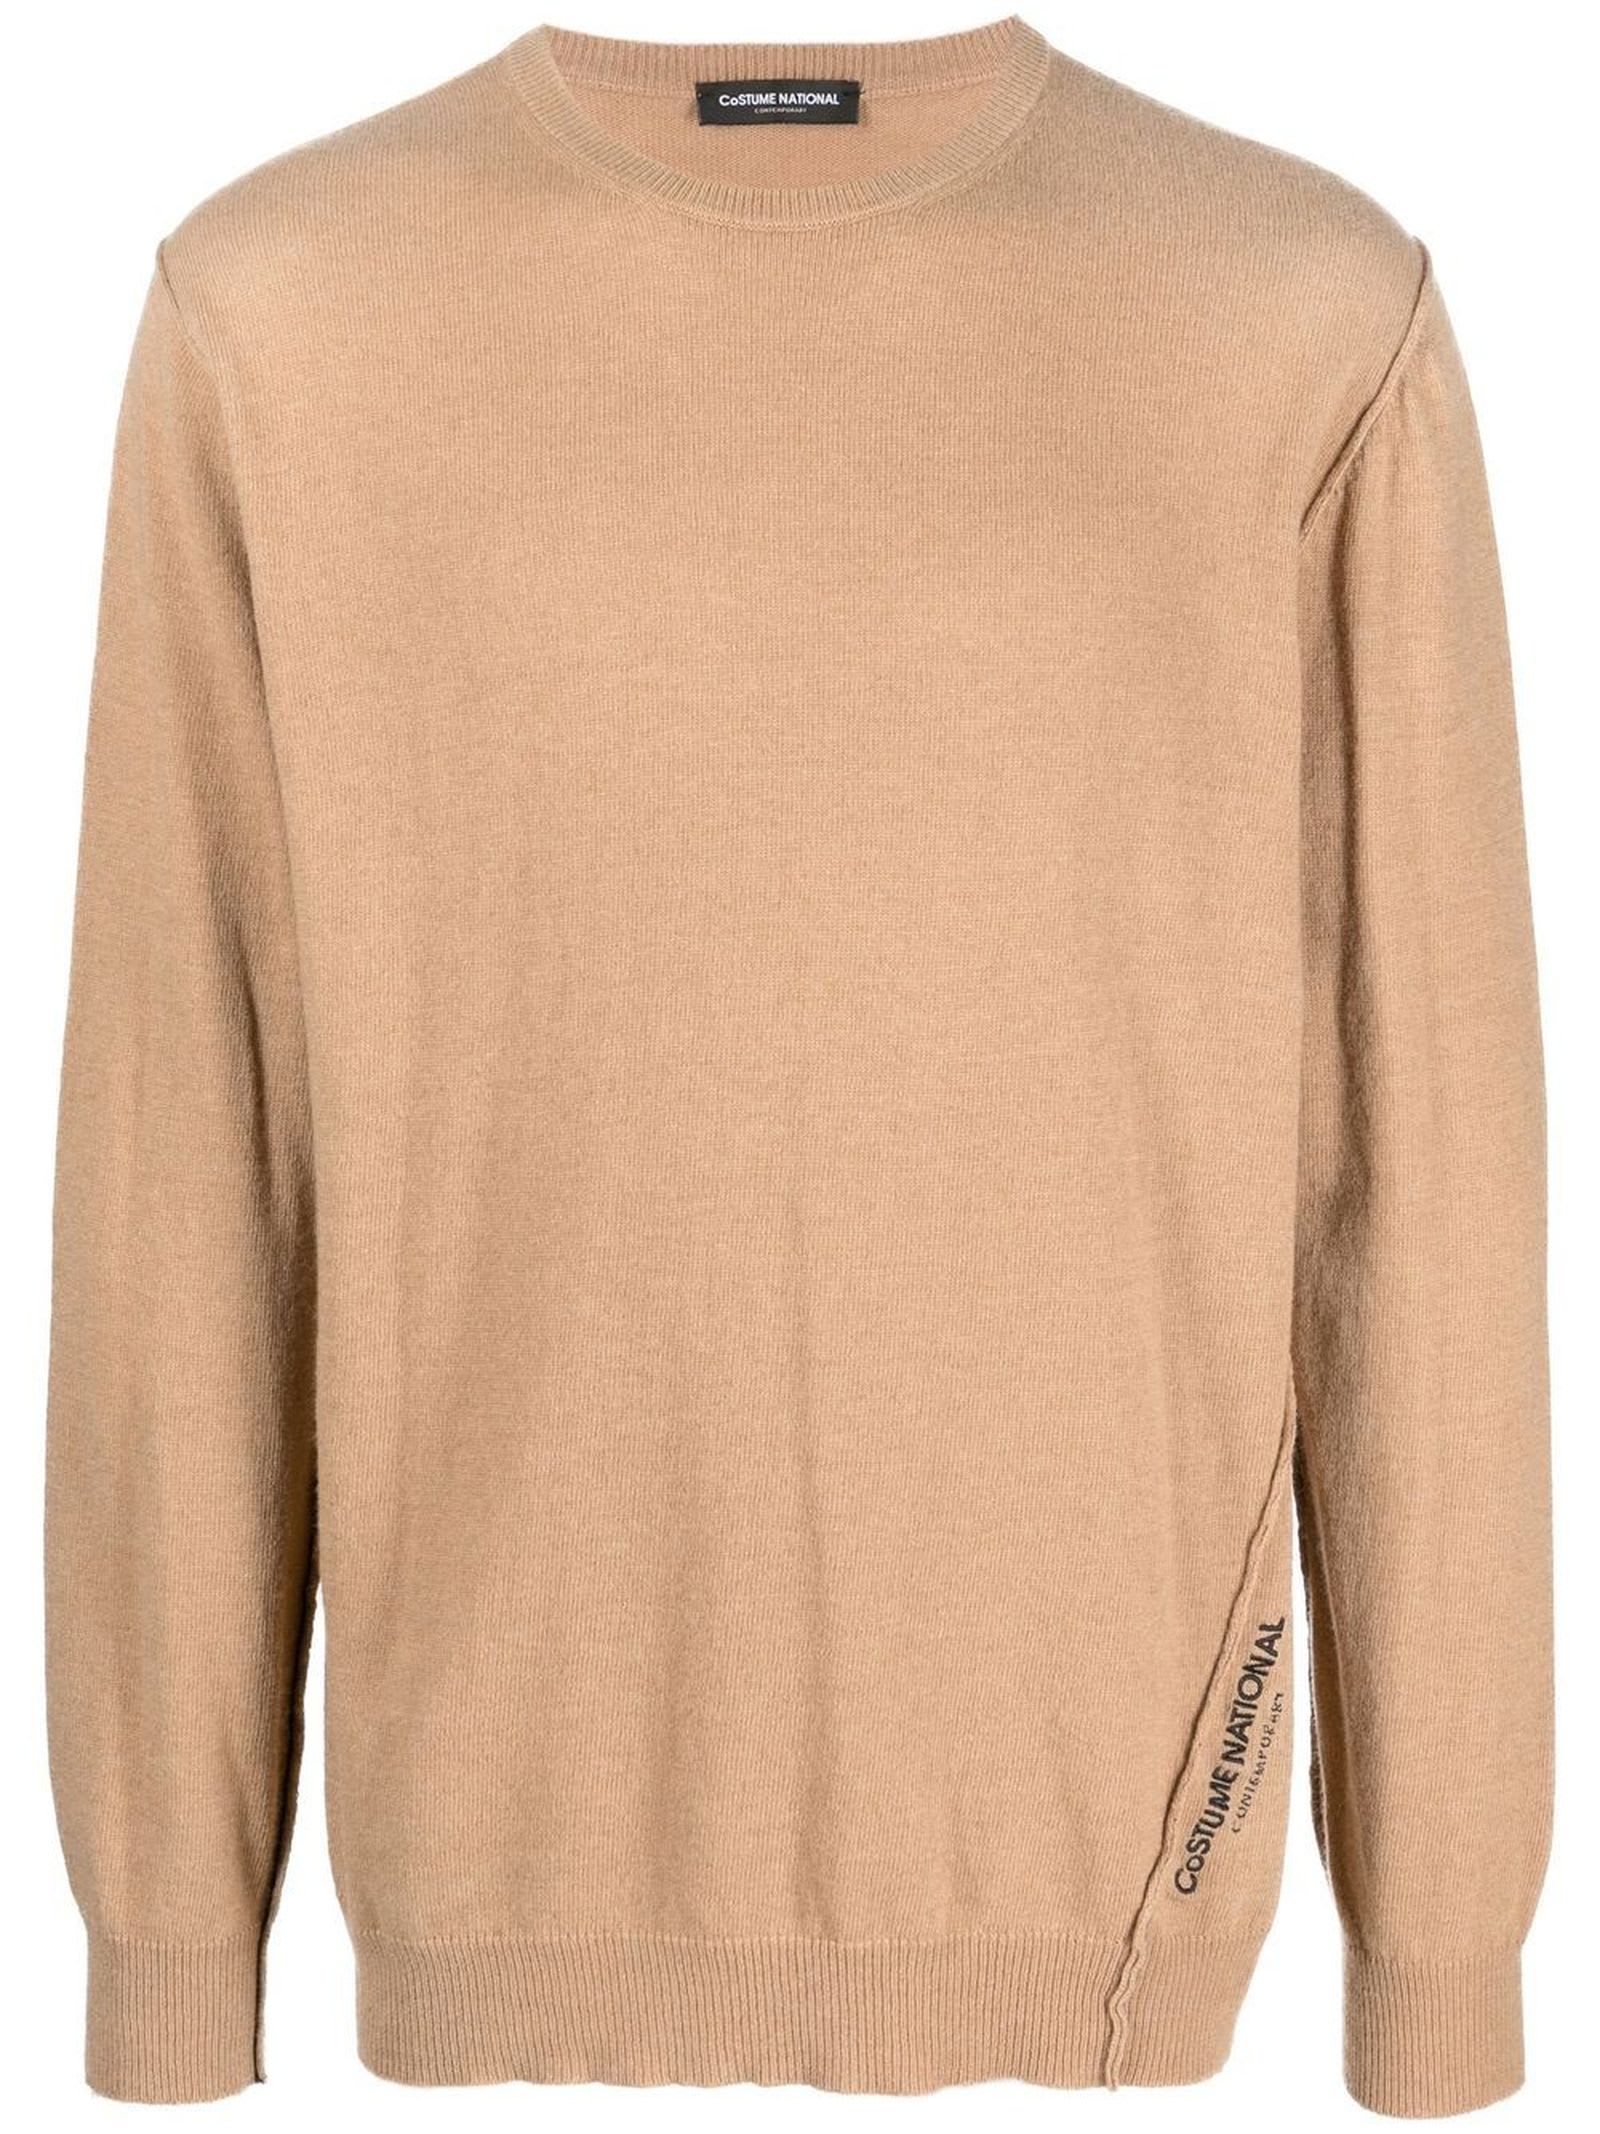 CoSTUME NATIONAL CONTEMPORARY Camel Brown Wool And Cashmere Jumper